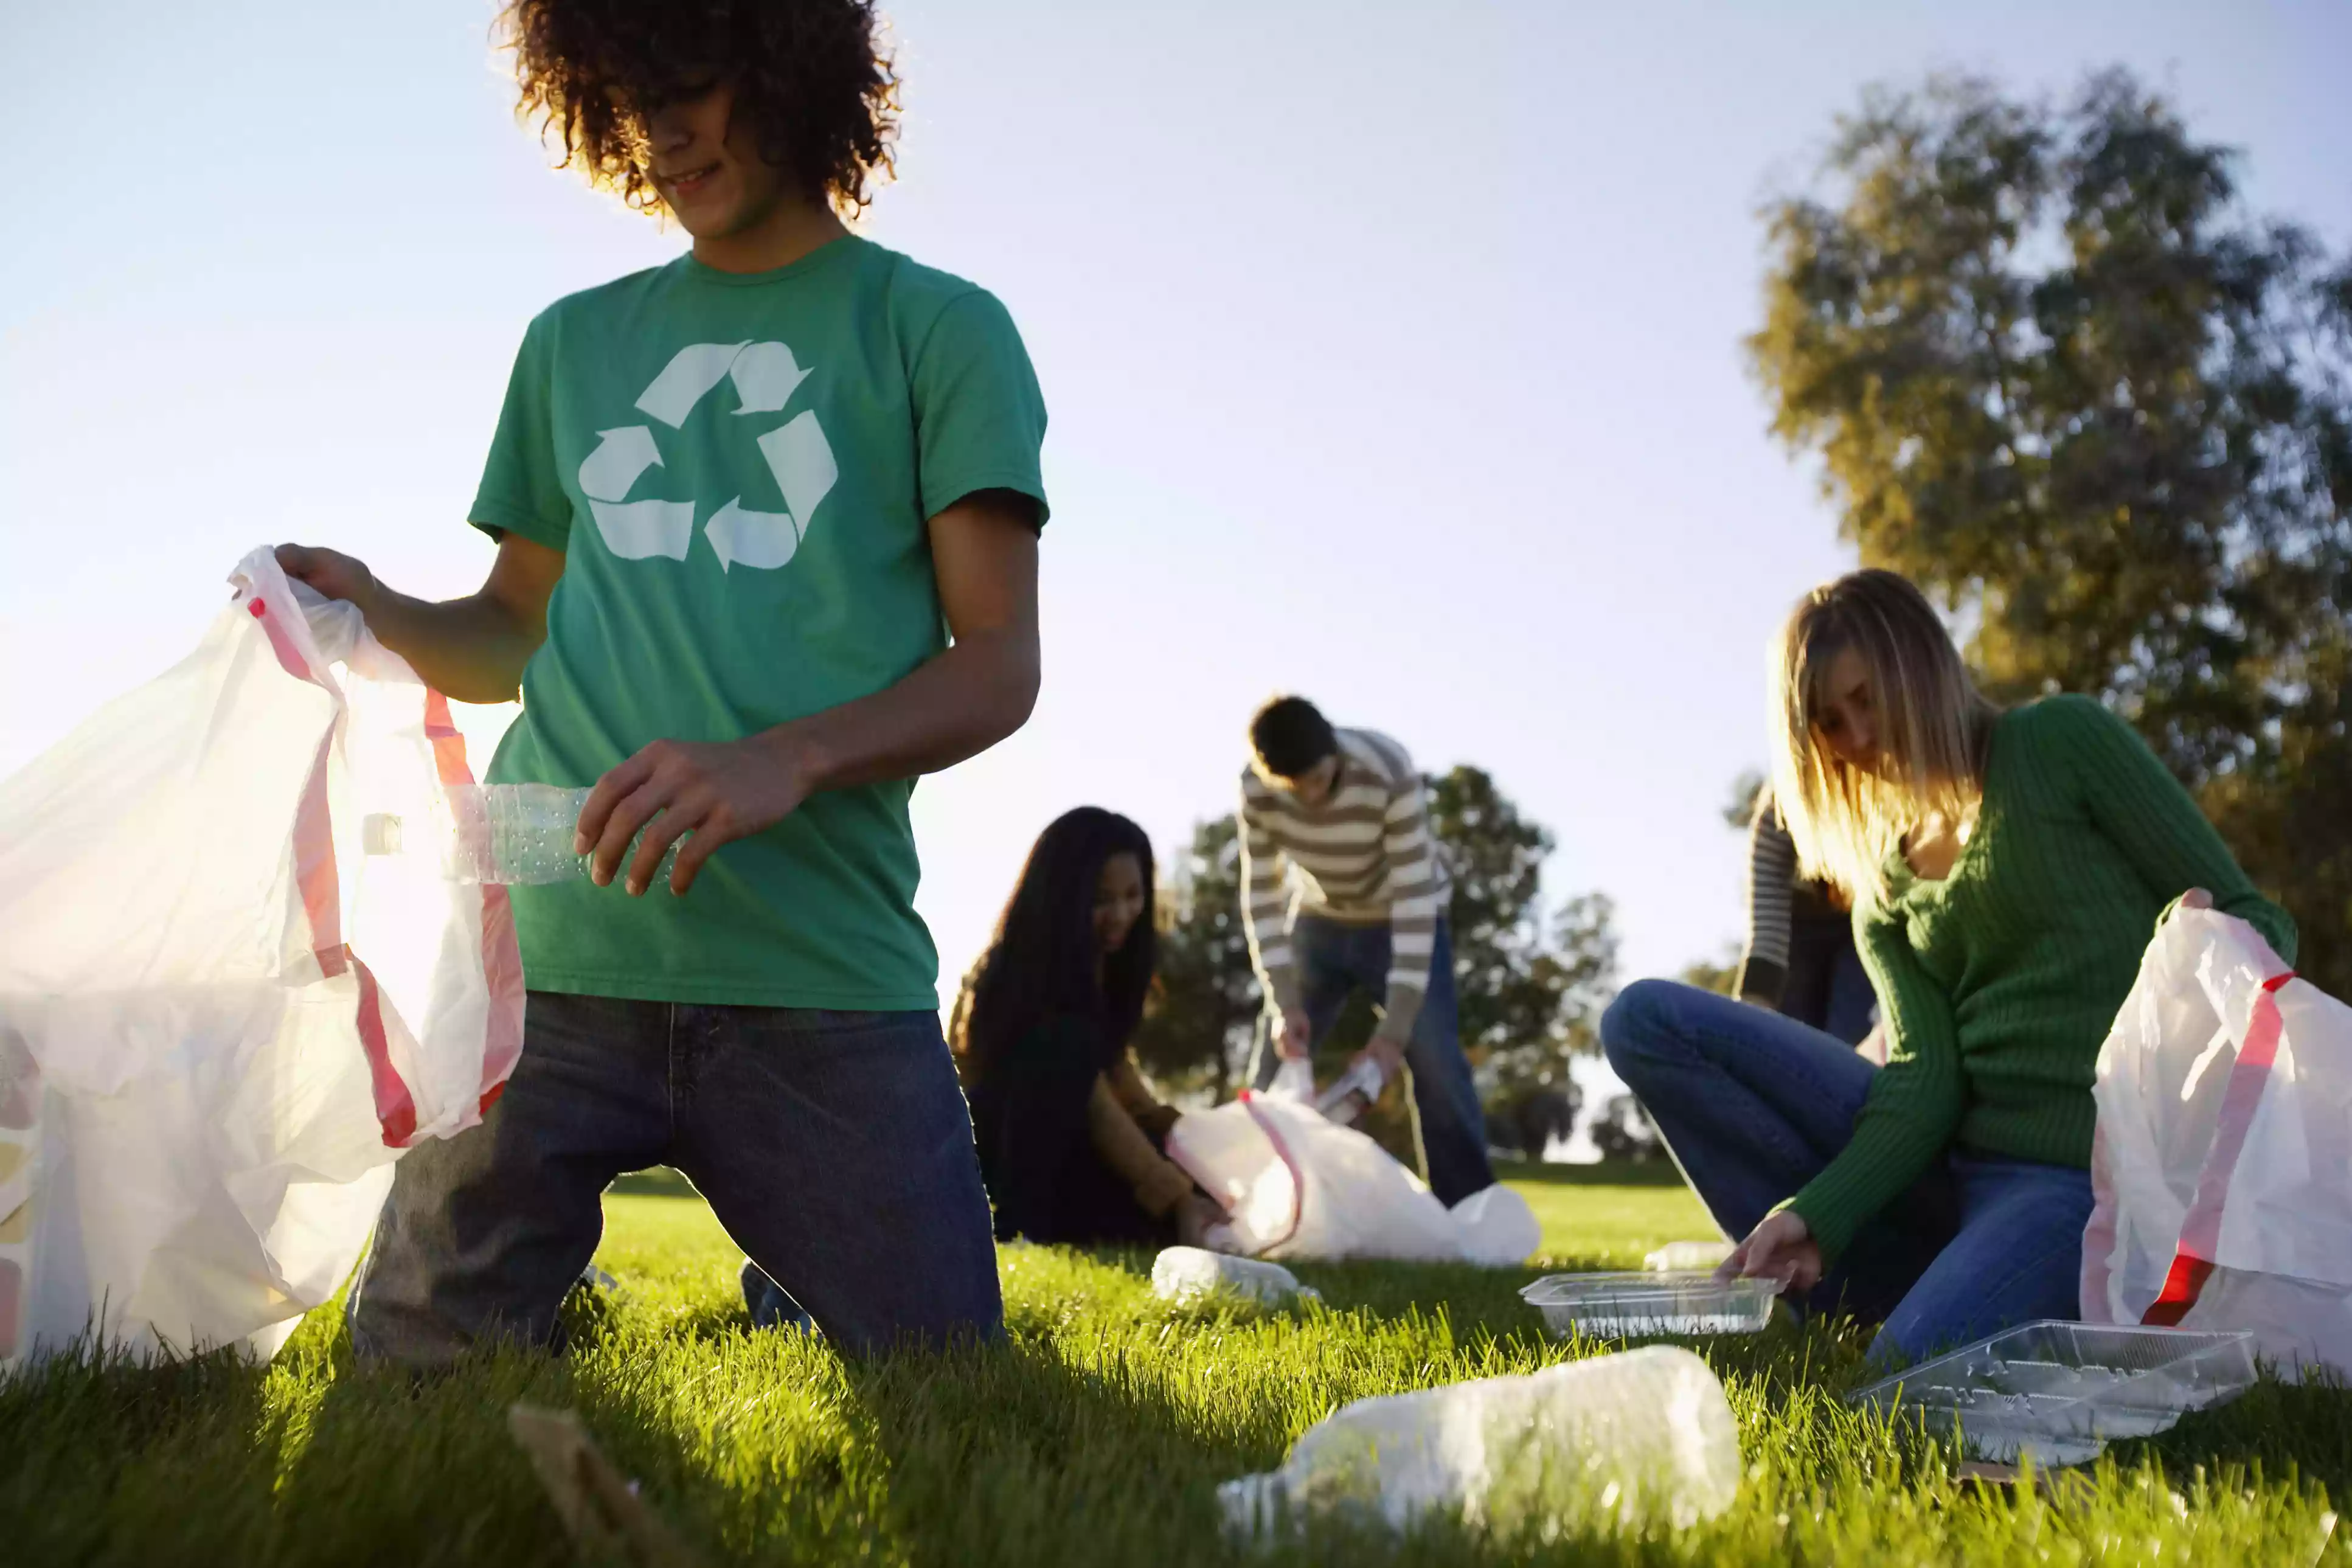 Young people picking up trash in a field on a sunny day.